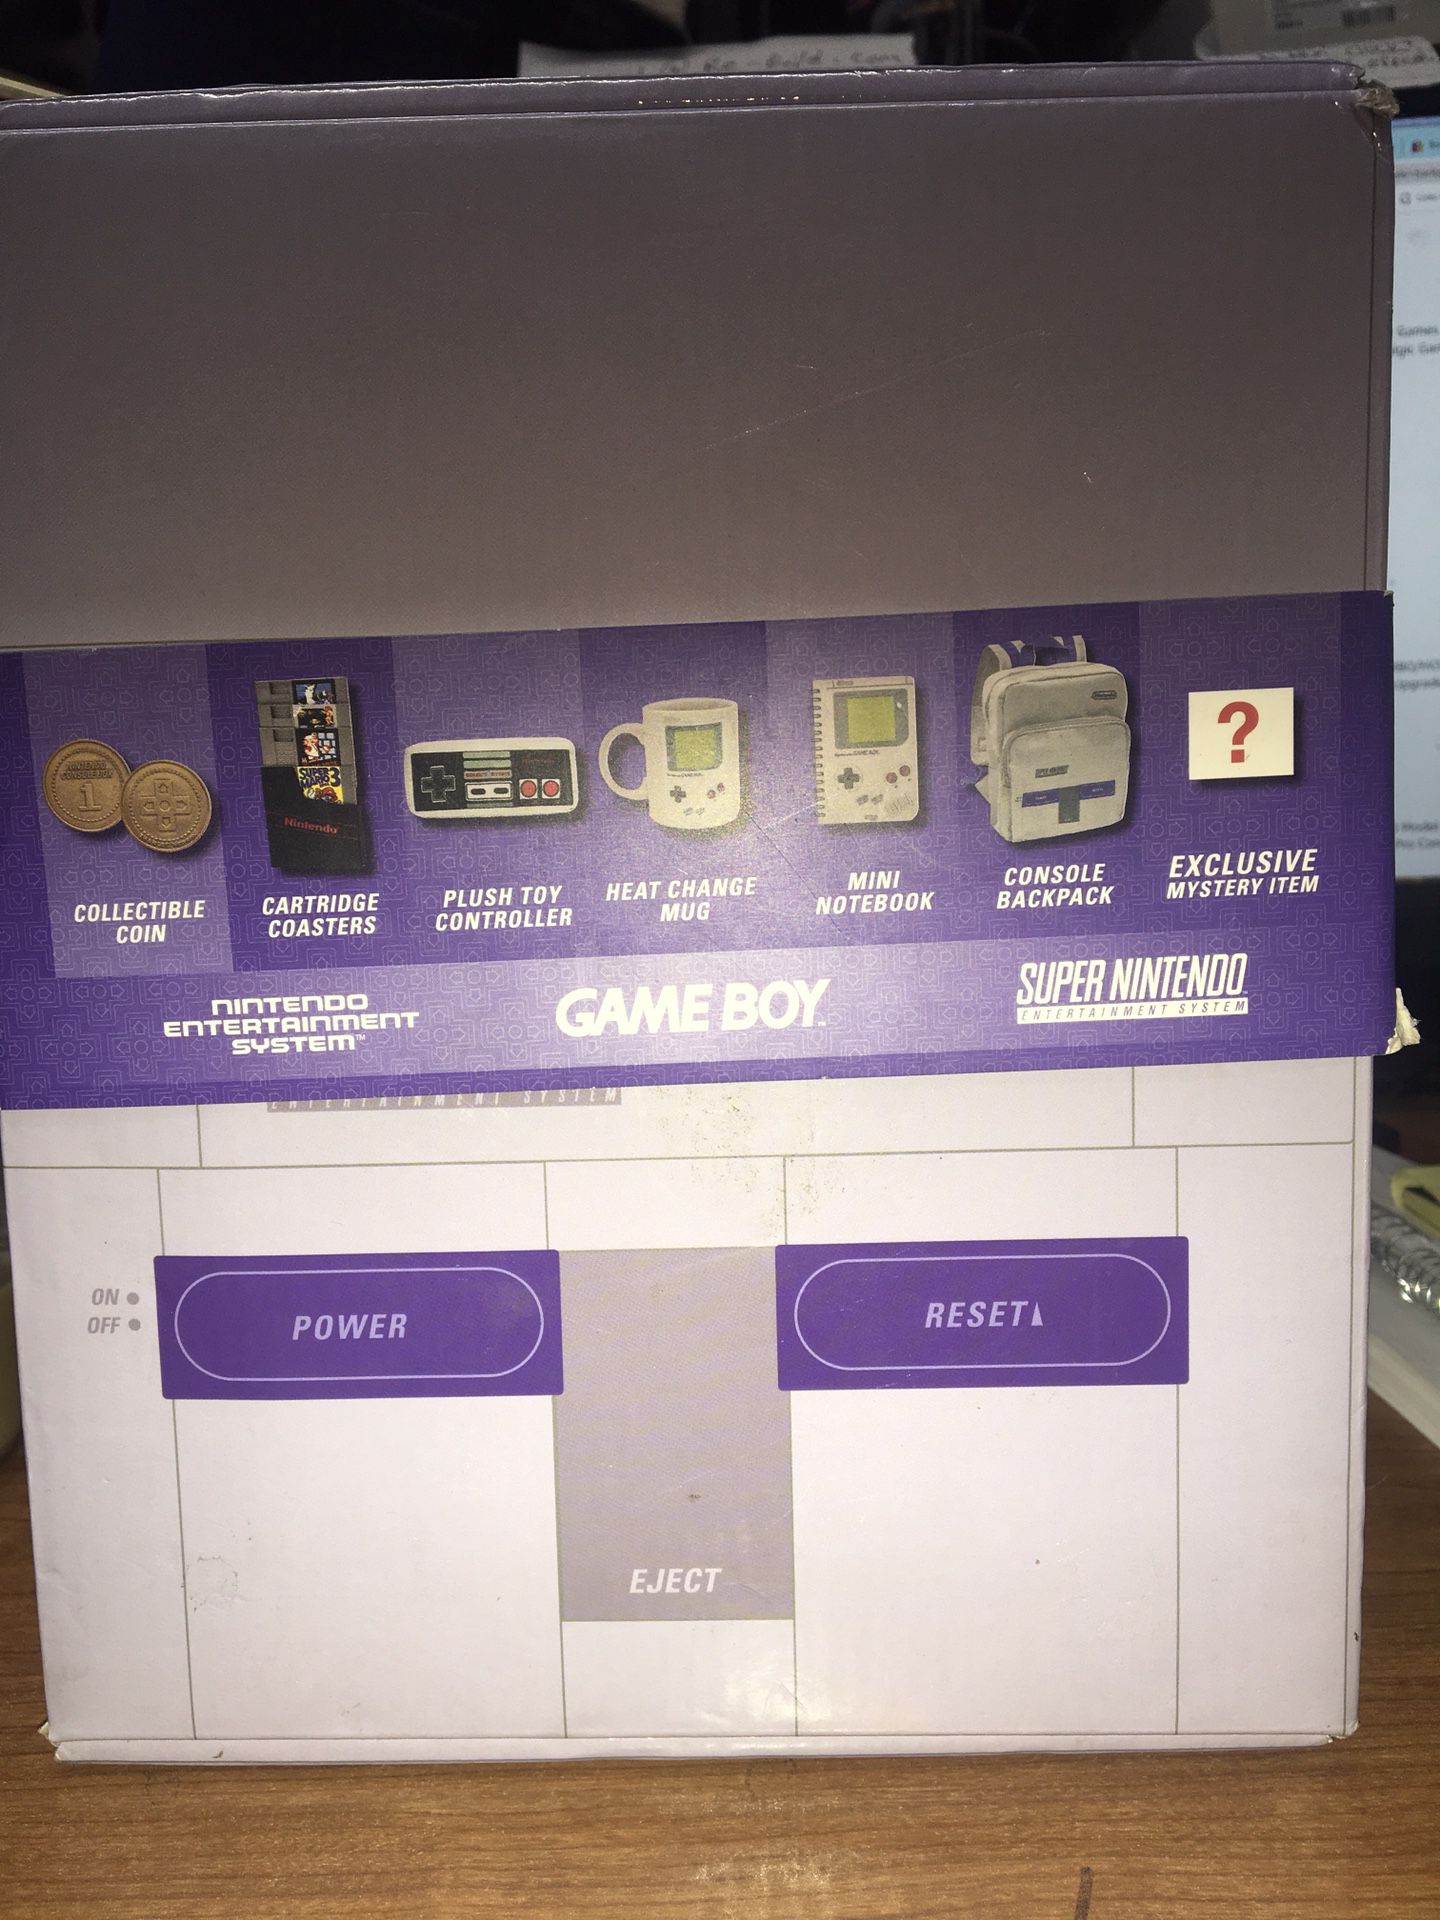 GameBoy Super Nintendo  Entertainment System Collectible Items 